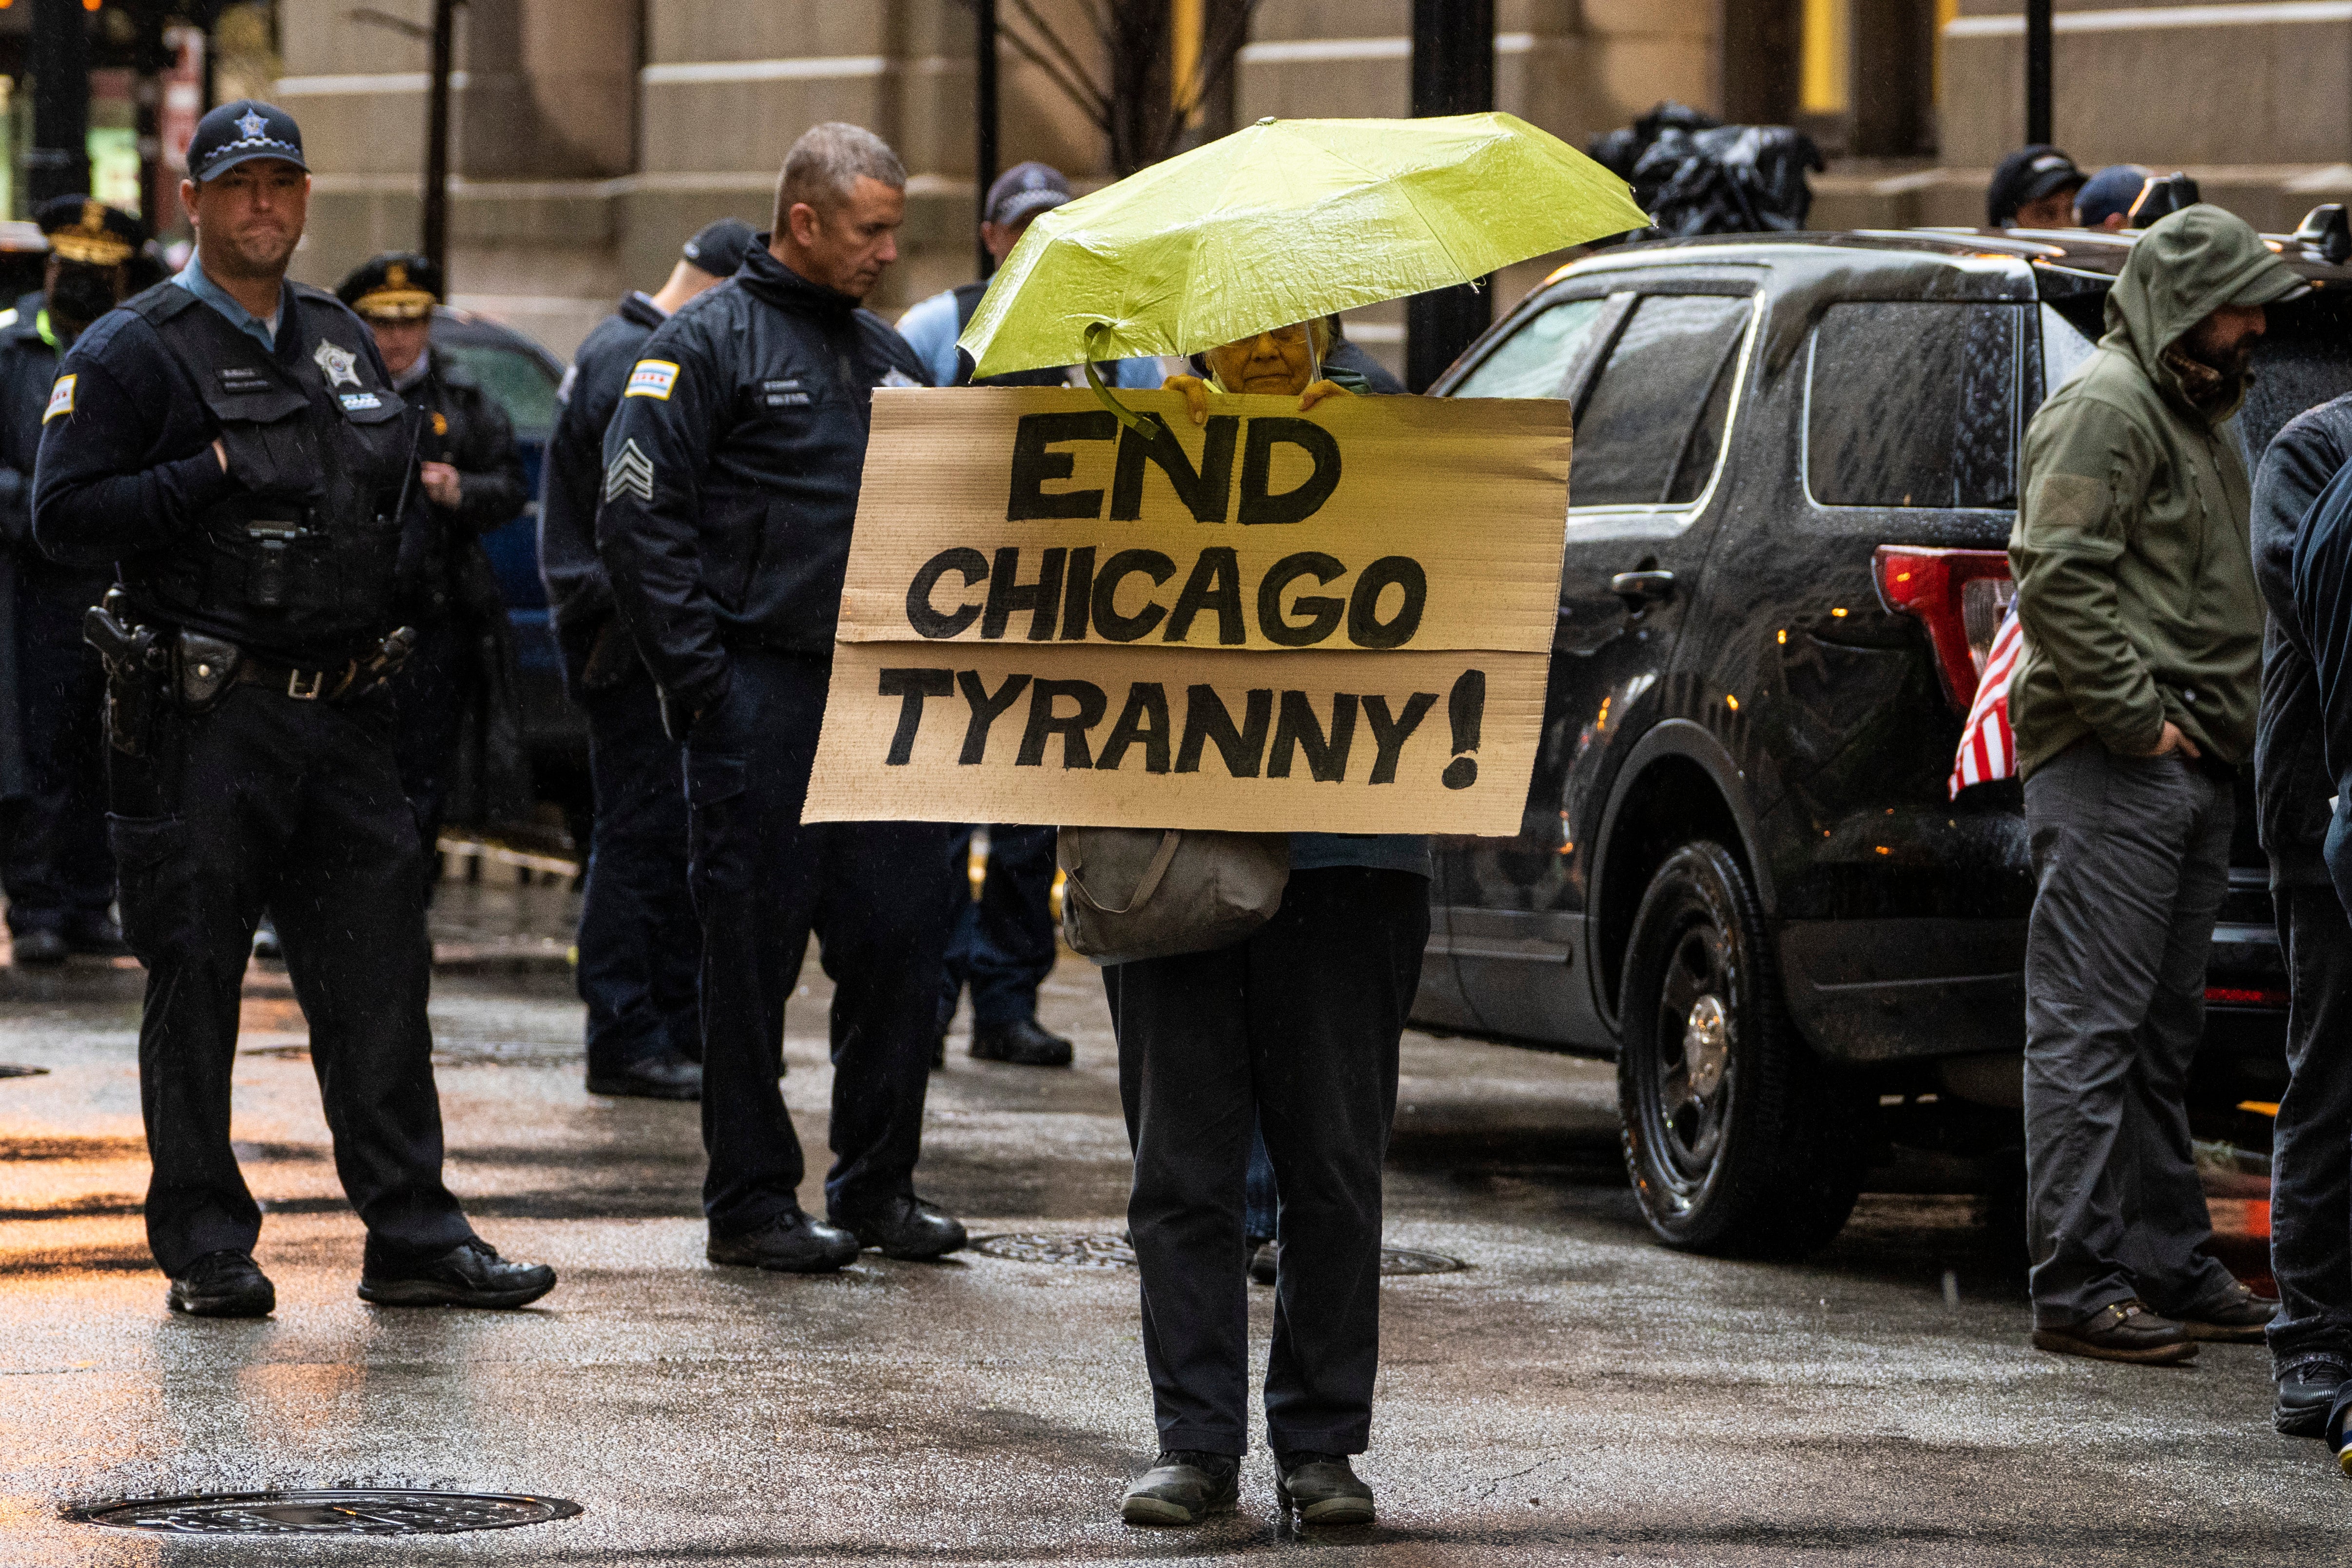 Fraternal Order of Police Lodge 7 members and their supporters protest against Covid-19 vaccine mandates outside City Hall before a Chicago City Council meeting, on 25 October, 2021